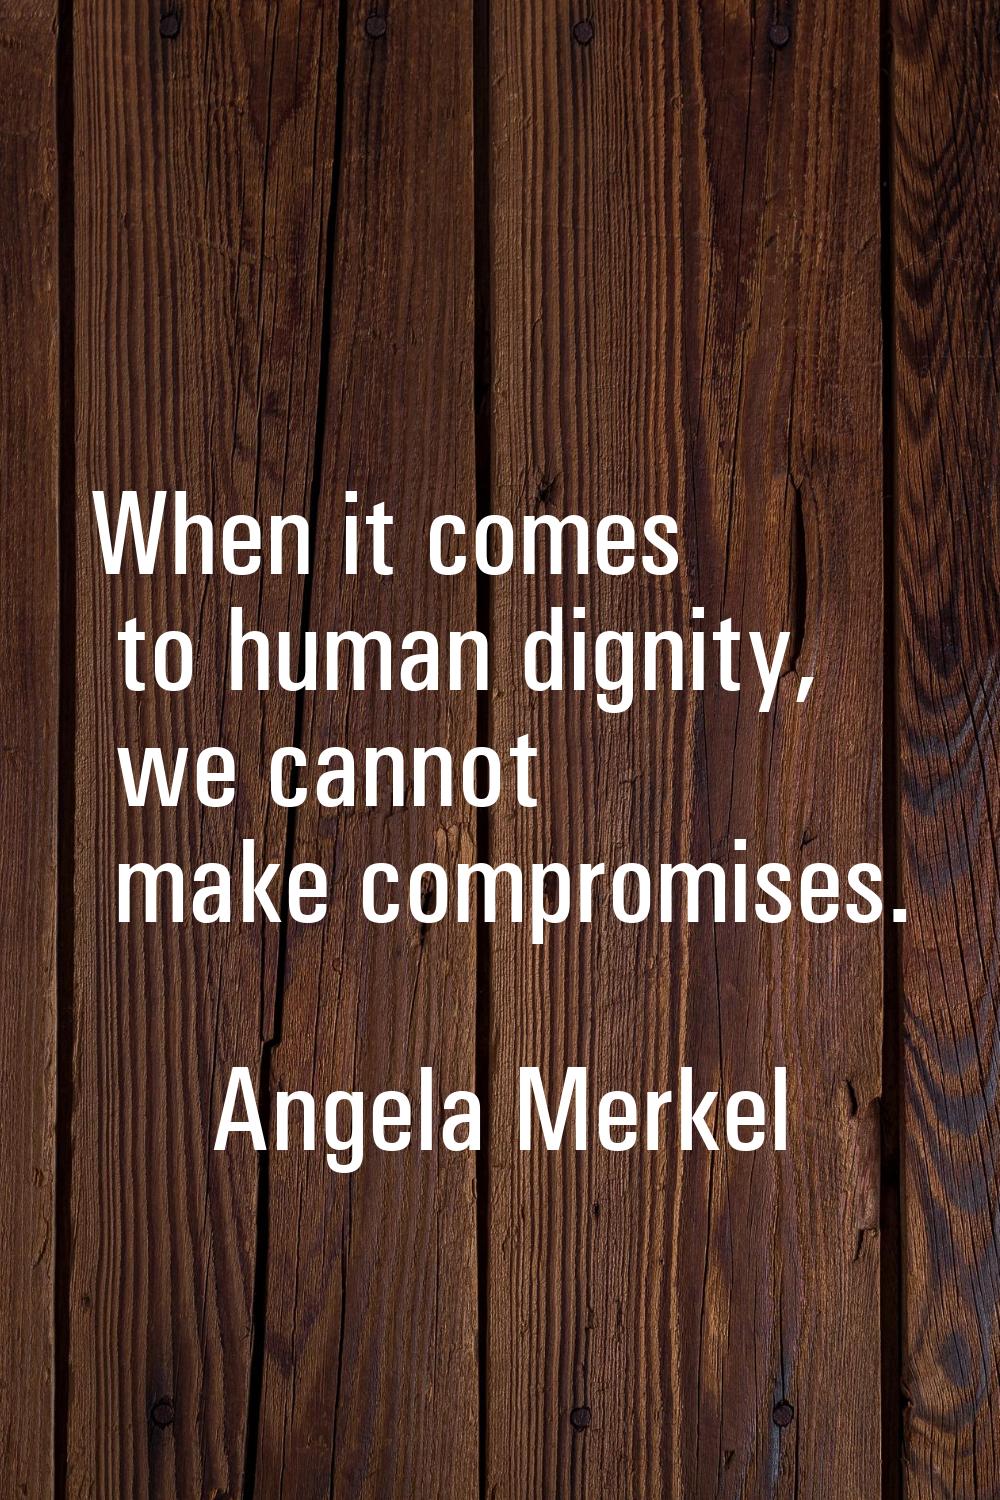 When it comes to human dignity, we cannot make compromises.